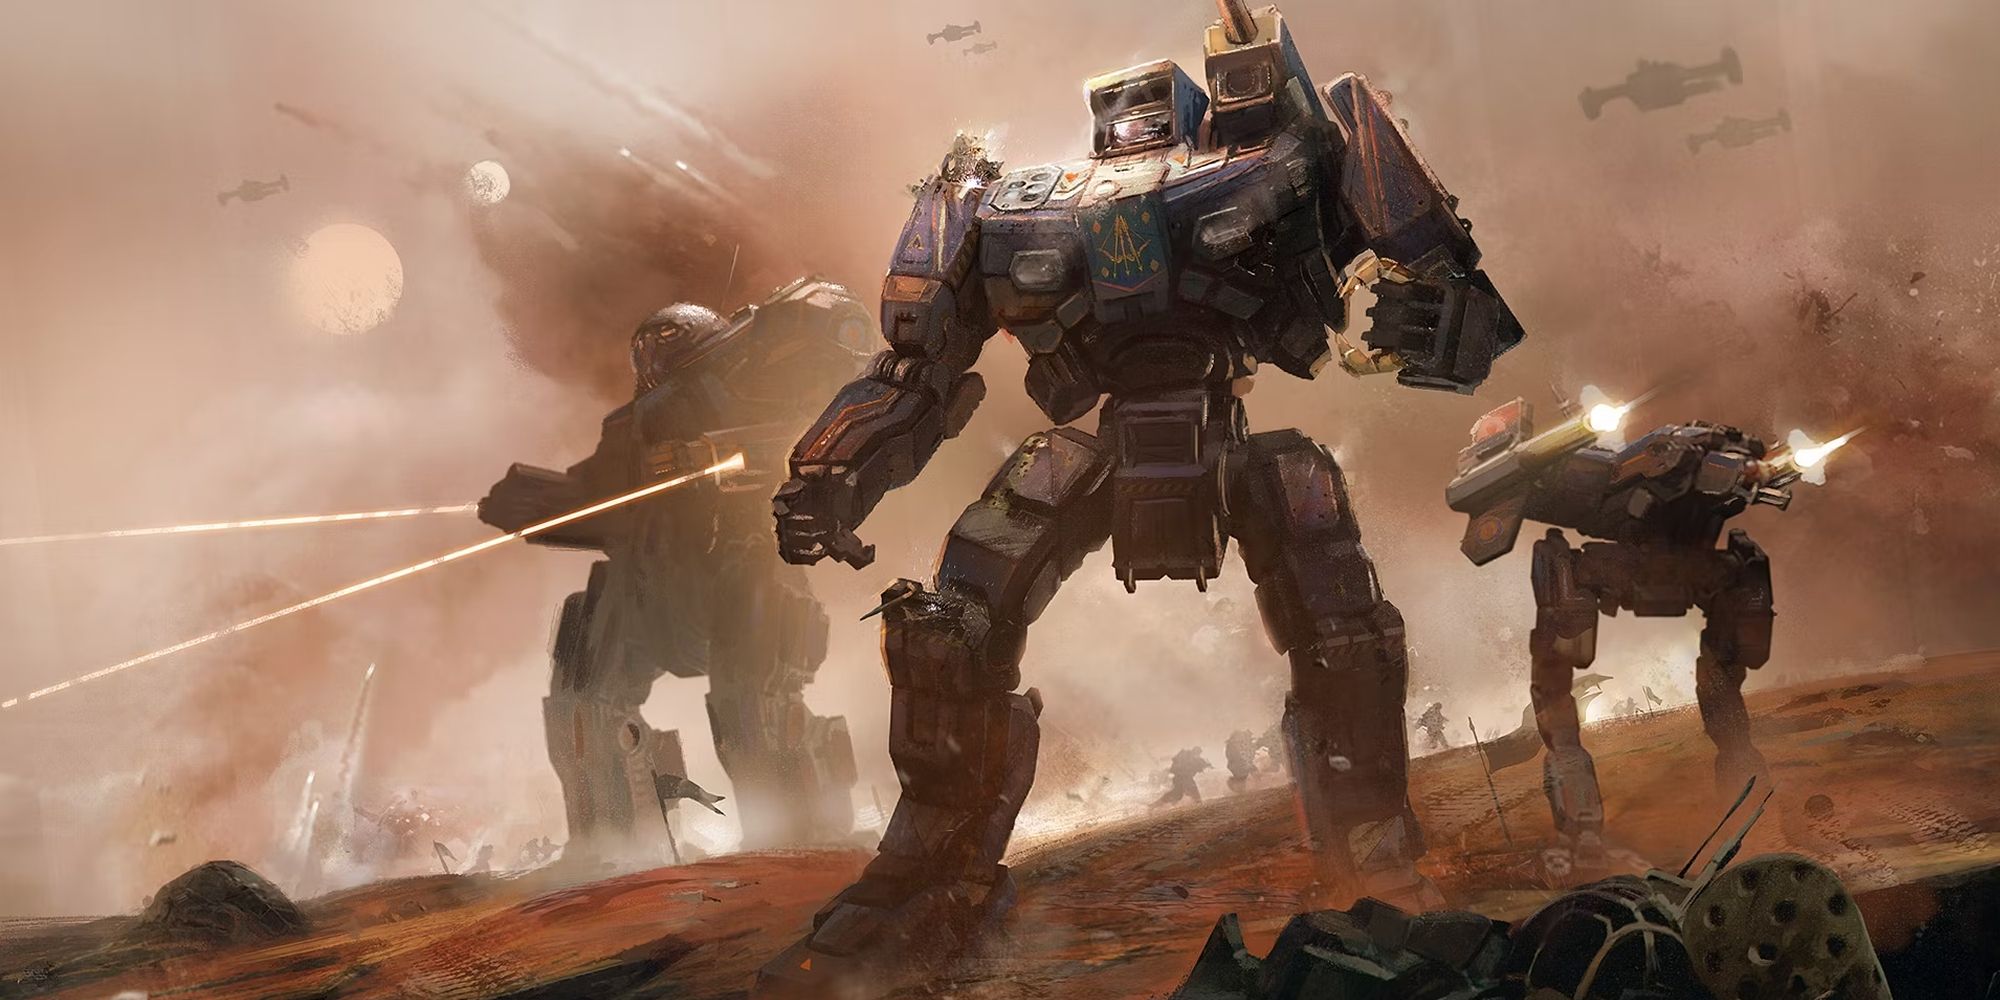 Battletech Expansion Overview: Which DLC is best? | 2Game.com